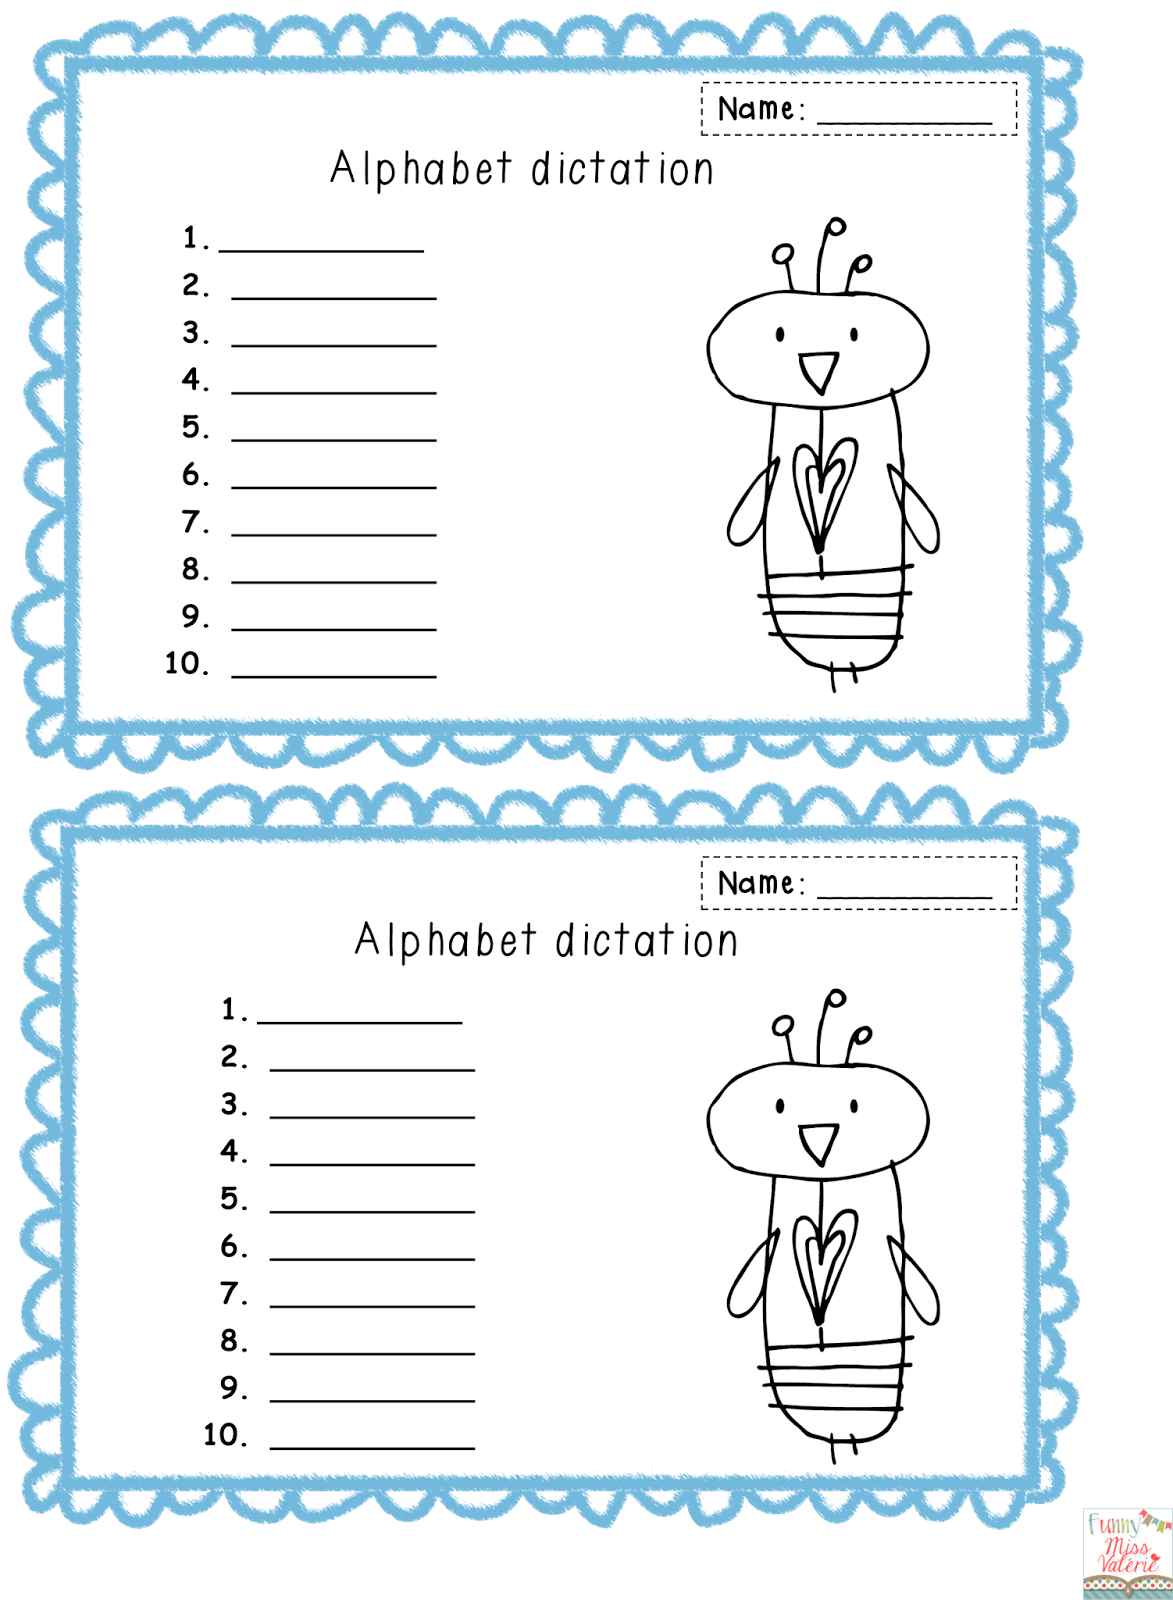 handwriting clipart dictation